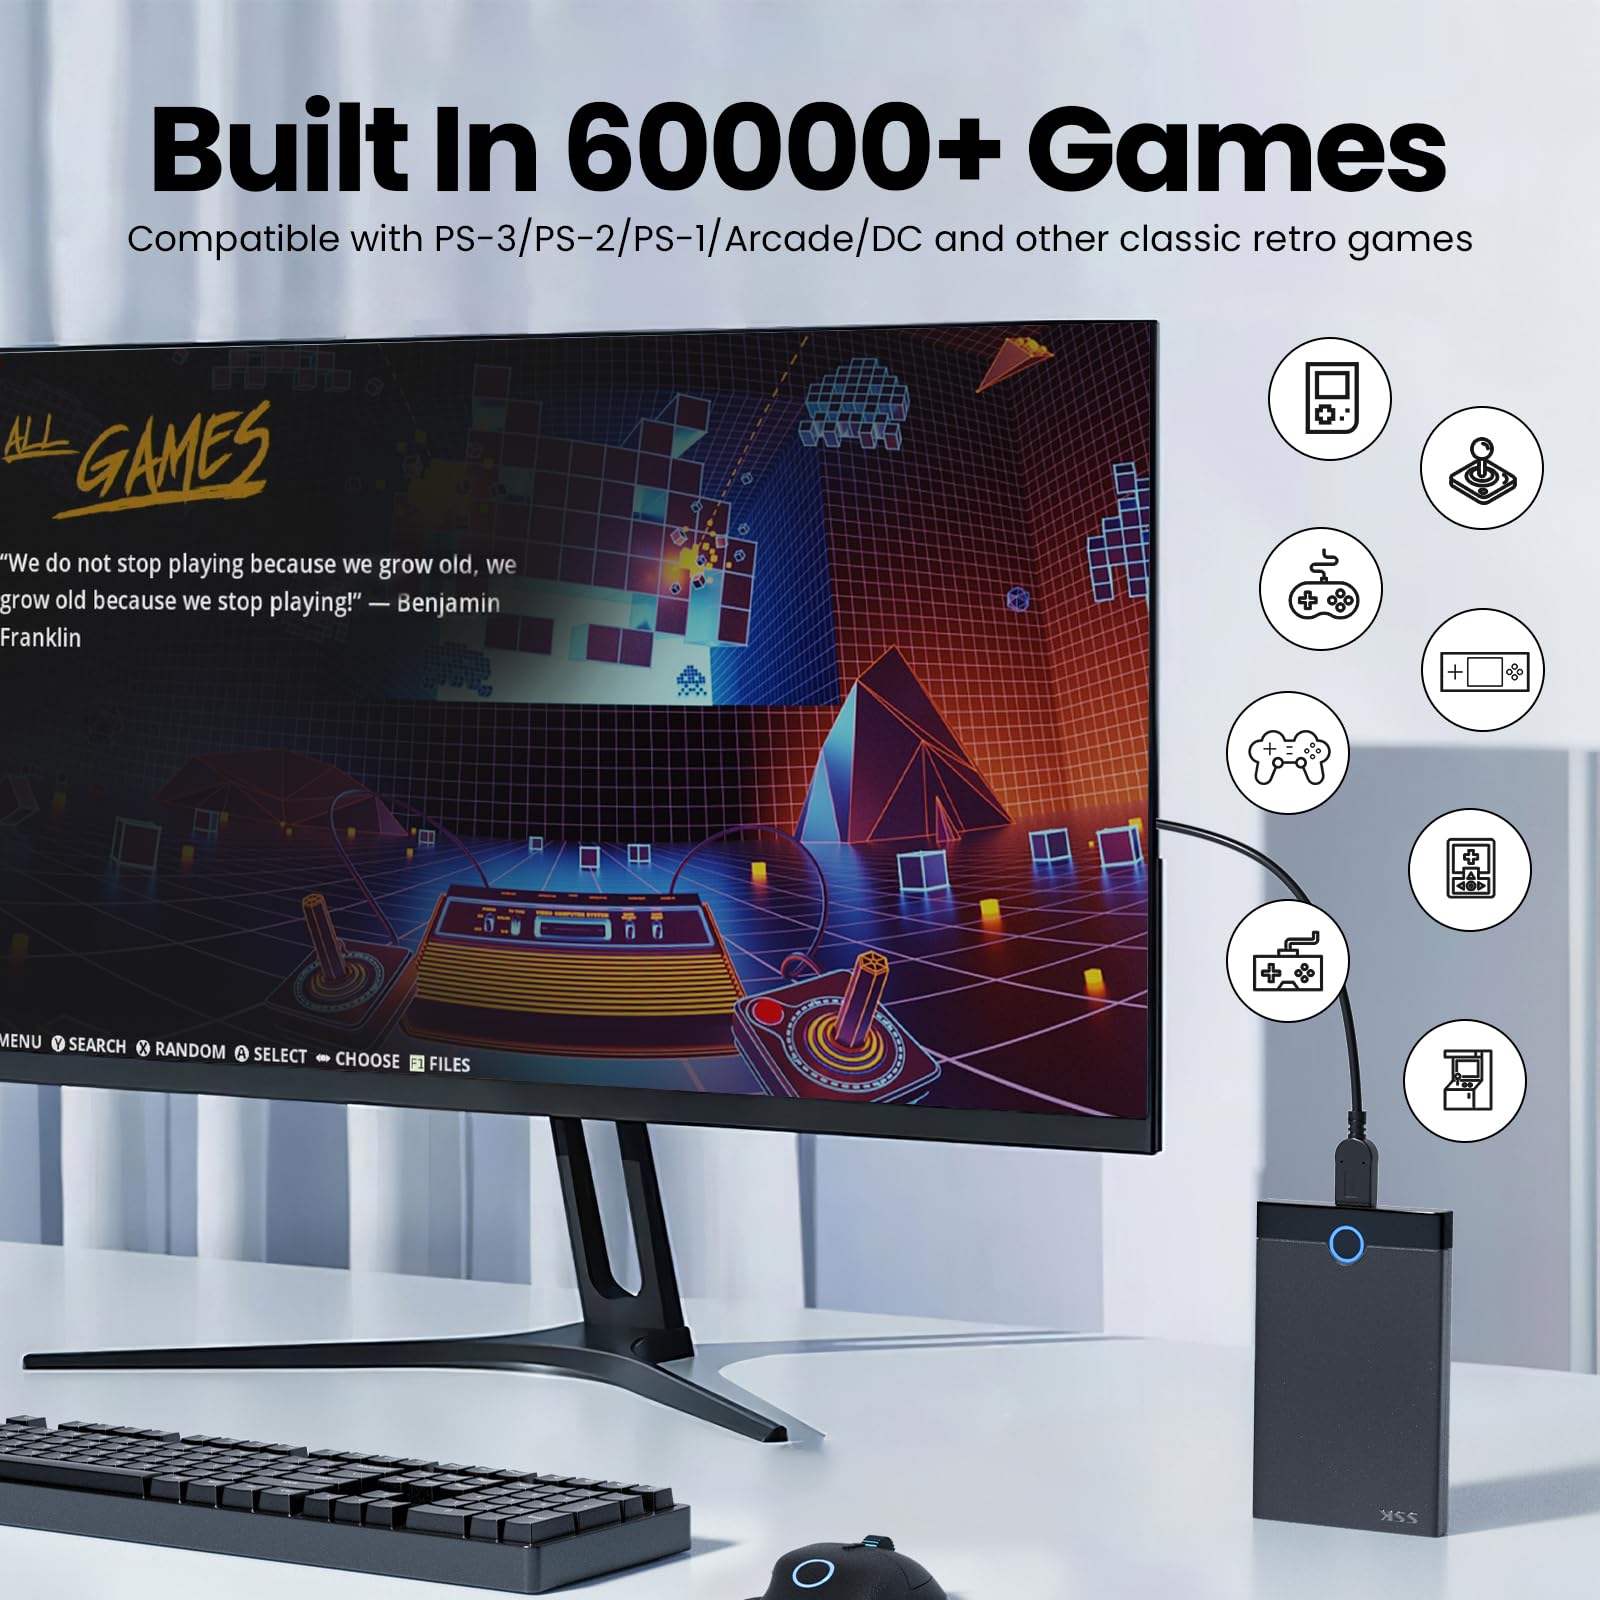 Bearway Retro Game Console 500G HDD- Video Game Console with 60000+Classic Games, External Hard Drive Compatible with 70+Emulators and 3D Games, Super Console for Windows 8.1/10/11, SATA 3.0